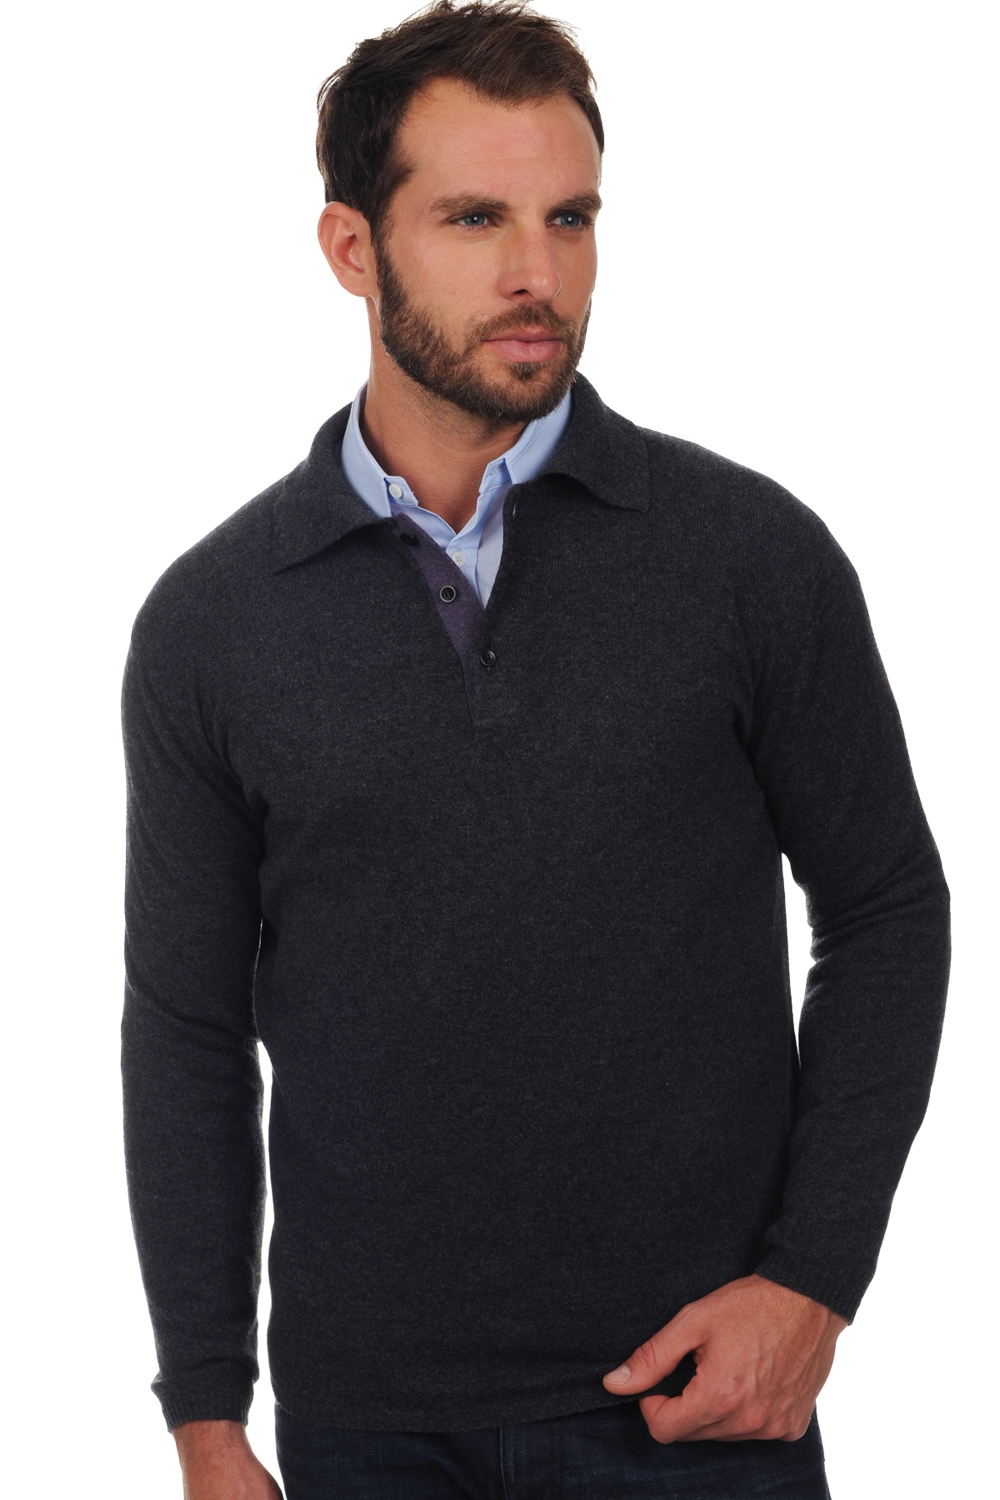 Cashmere men polo style sweaters scott charcoal marl aubergine s